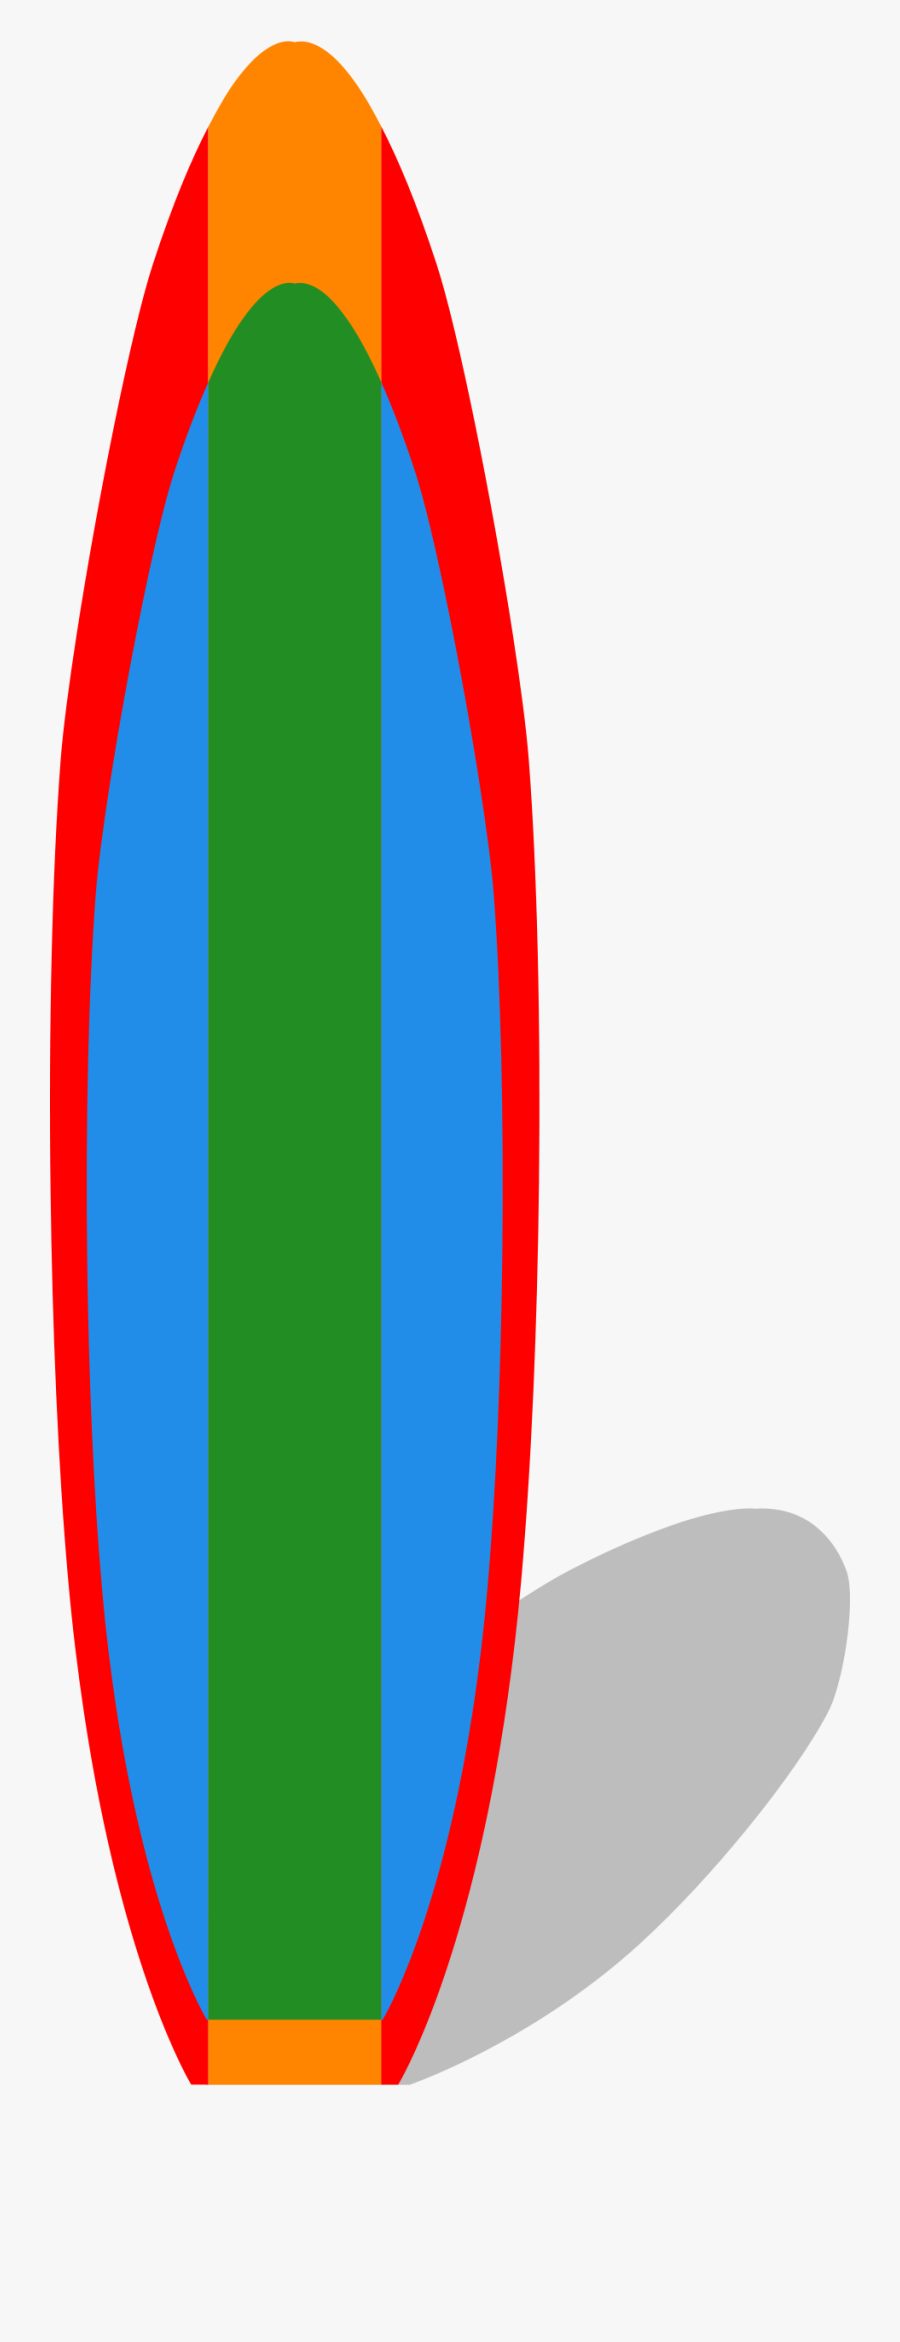 Surfboard Illustrations Clipart Free Clipart Image - Surfing Board Plain Animated, Transparent Clipart